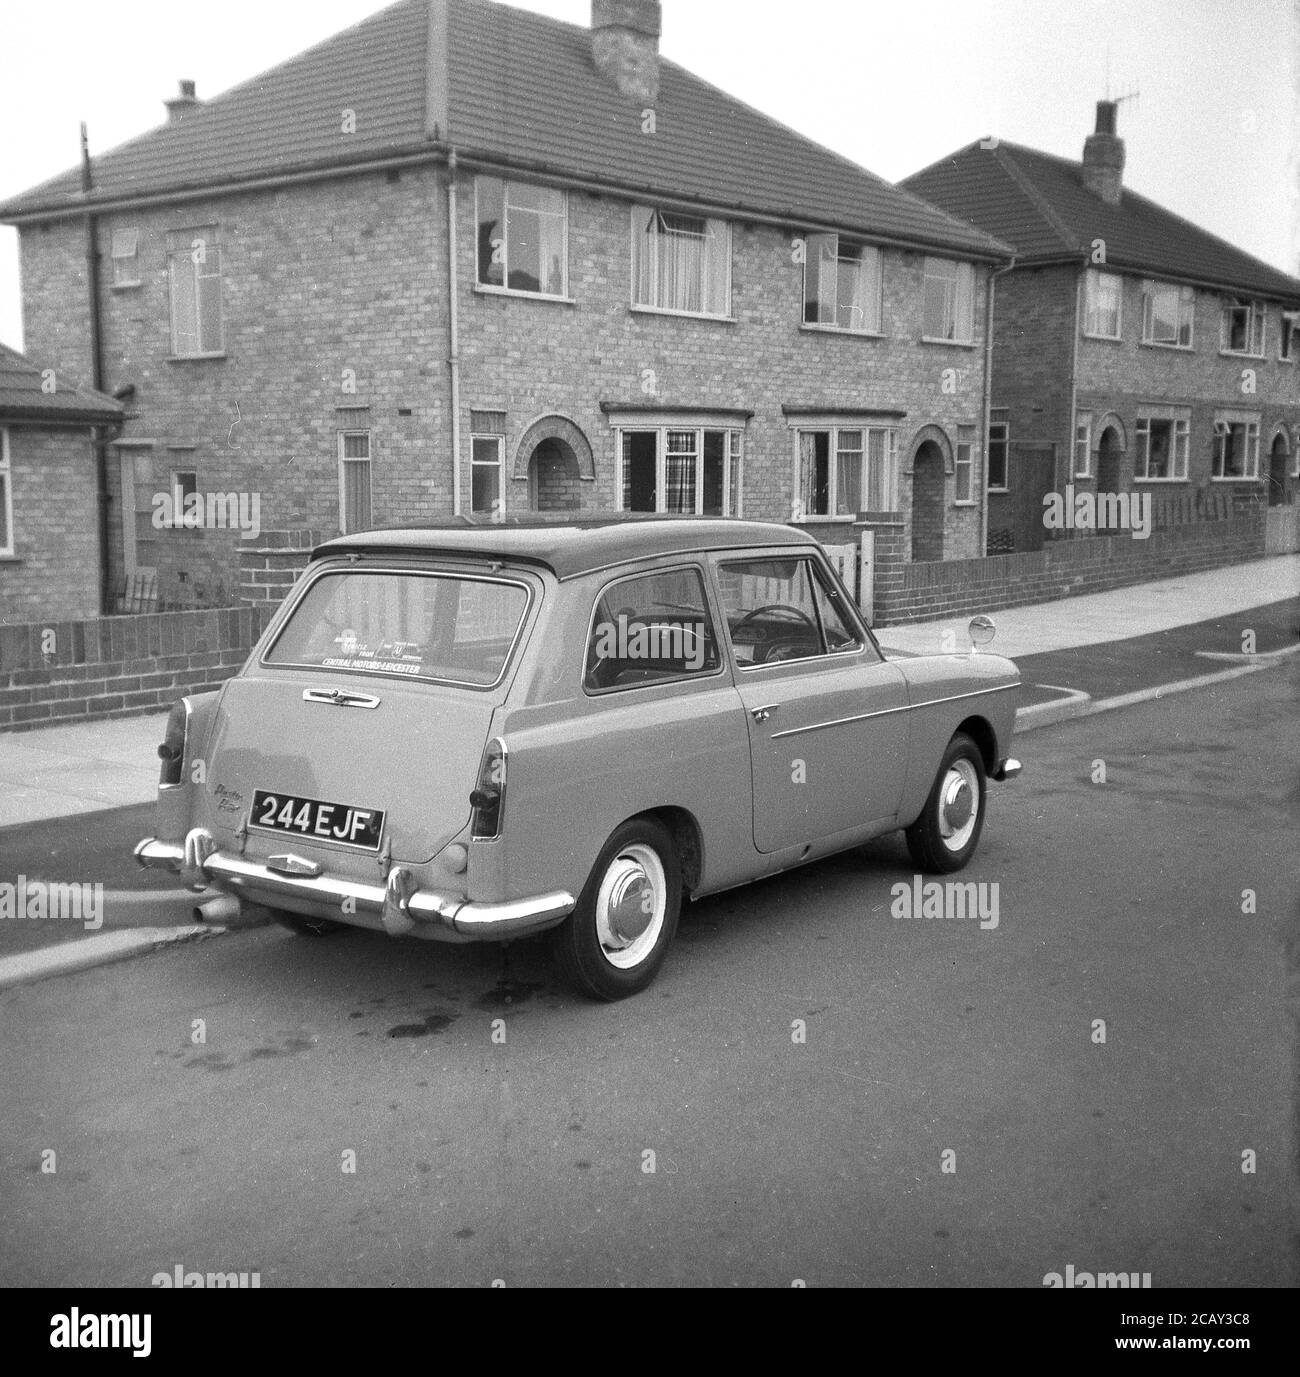 1960, historical, An Austin A40 Farina motorcar parked in a street on a new housing estate, England, UK. A small, economy car, made by the British Motor Coporation (BMC) it was named the Austin A40 Farina, reflecting the new design by the Italian 'Battista Farina's Pinin Farina Turin studio. The car shown here is the Mark 1 Saloon, made between 1958 and 1961. Stock Photo